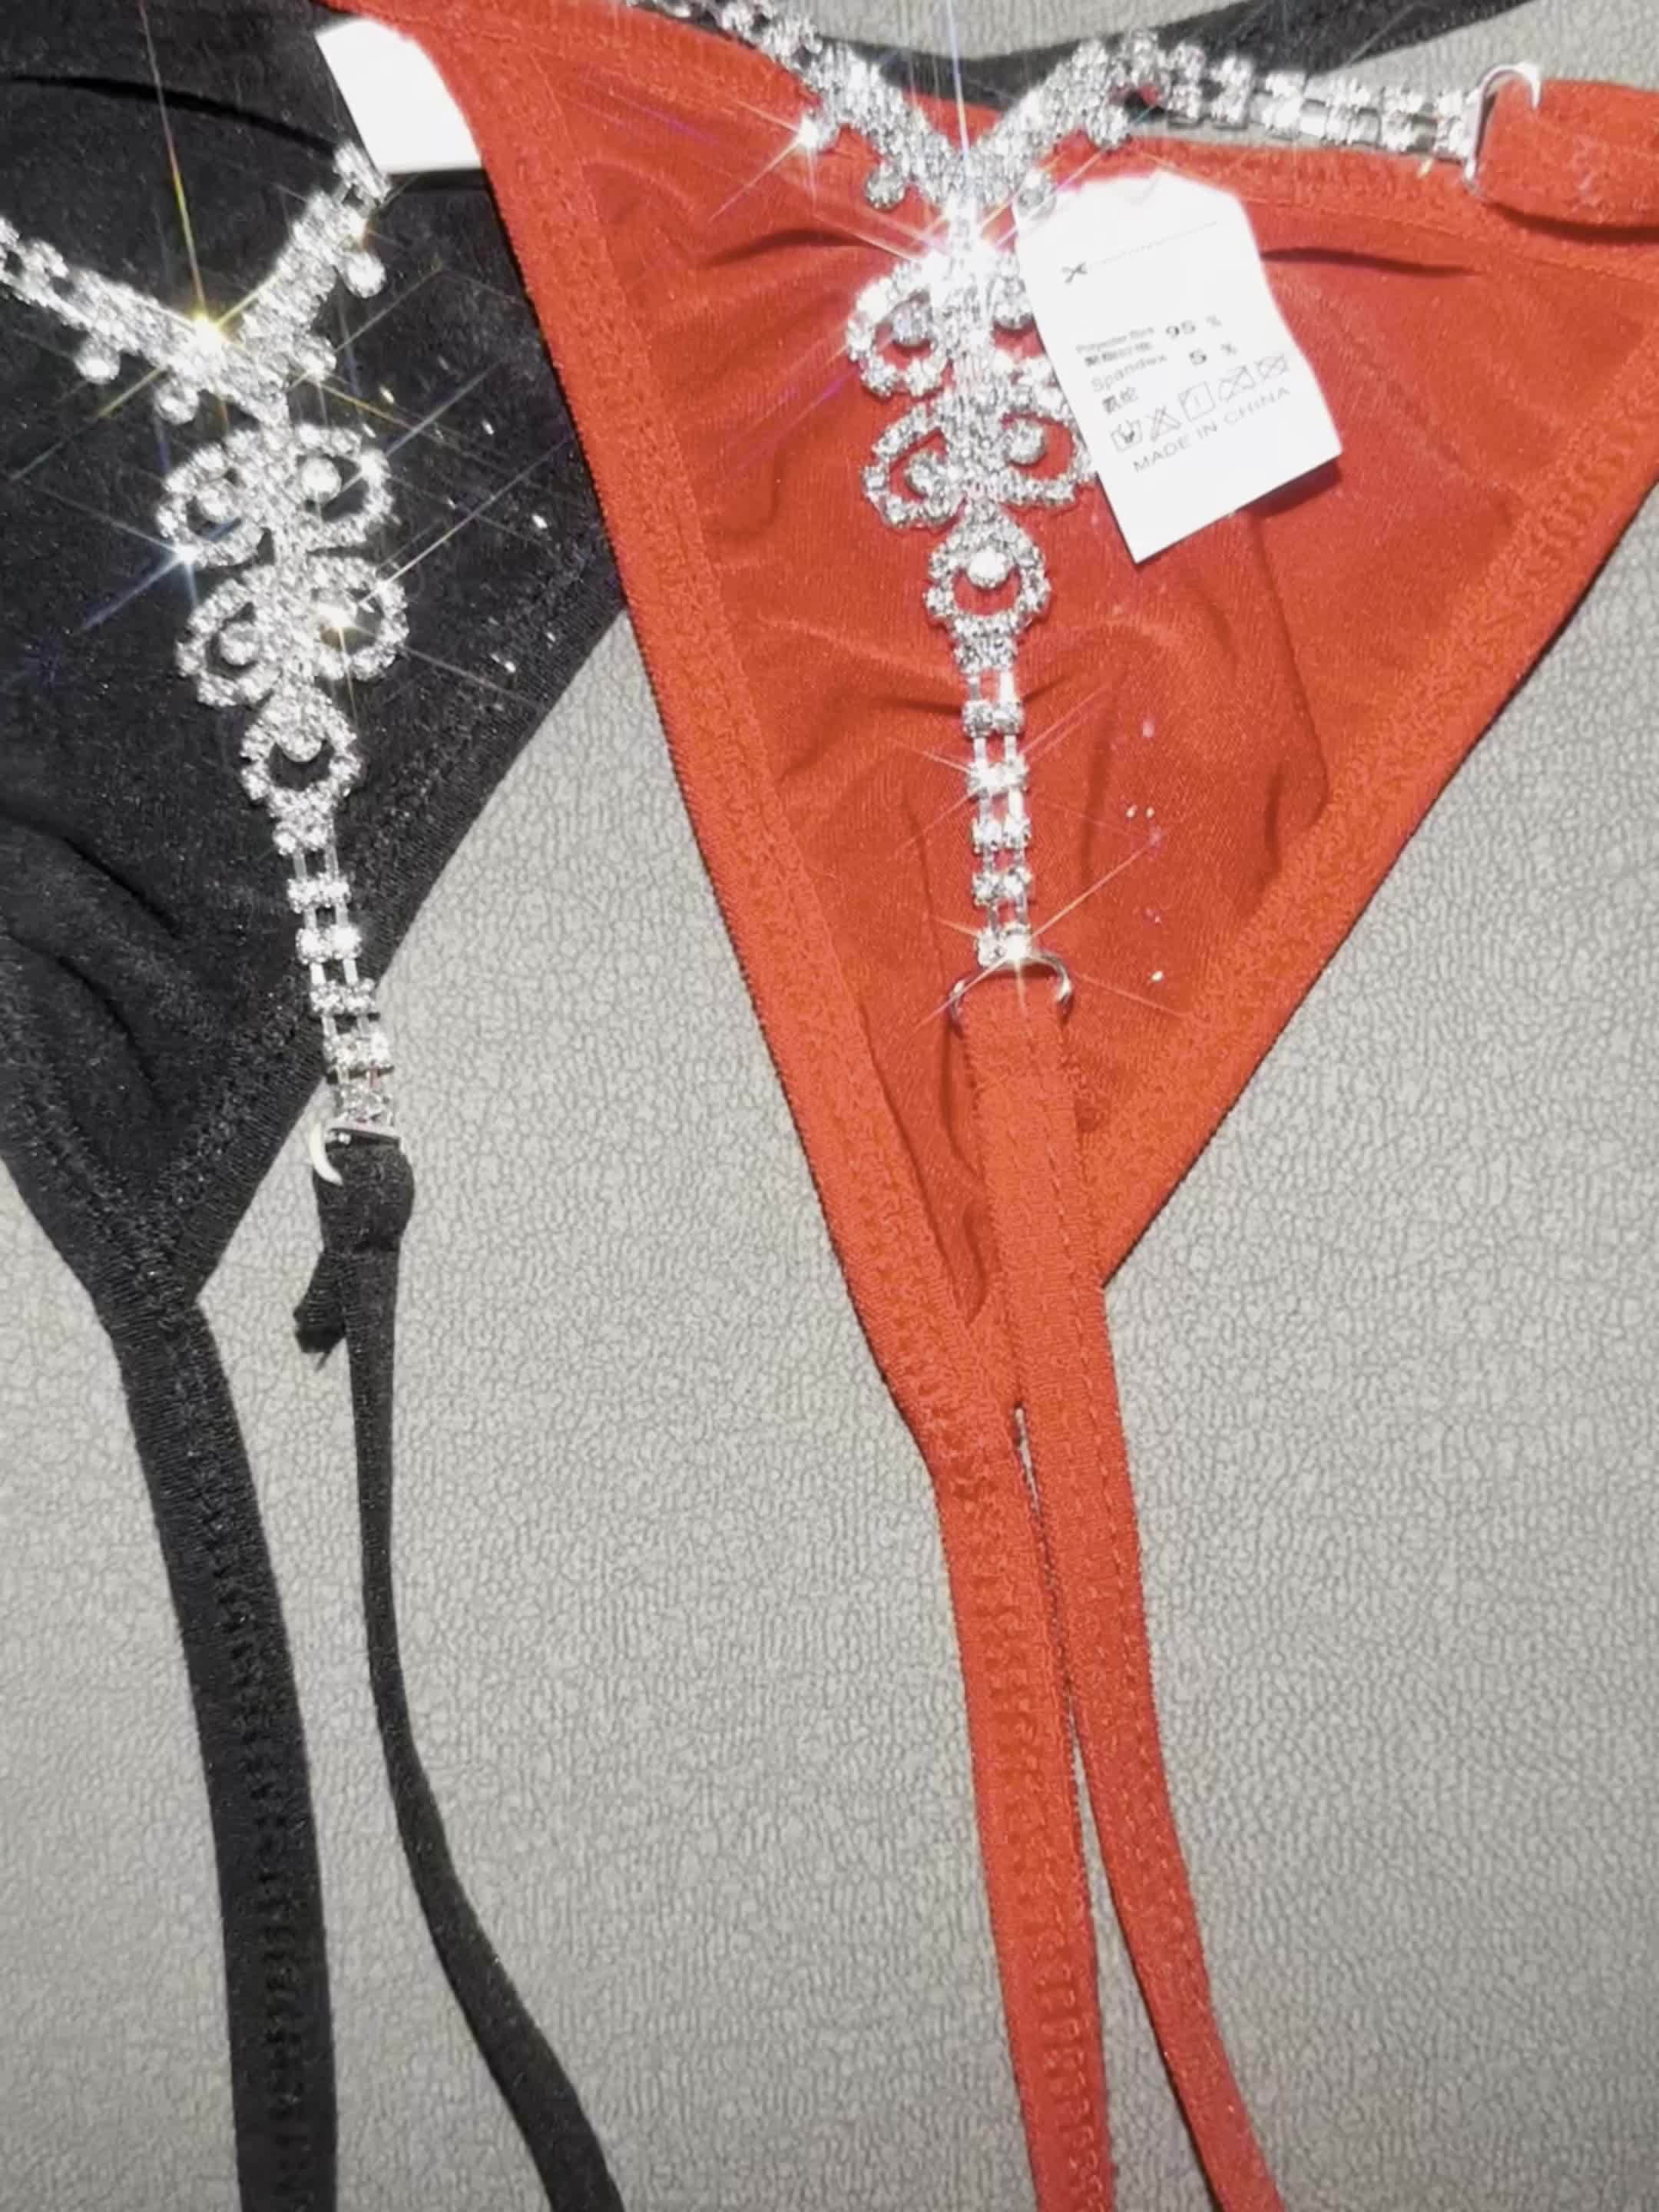 1pc New Arrival Dollar Sign Rhinestone Underwear, Sexy Circle G-String With  Body Chain For Women